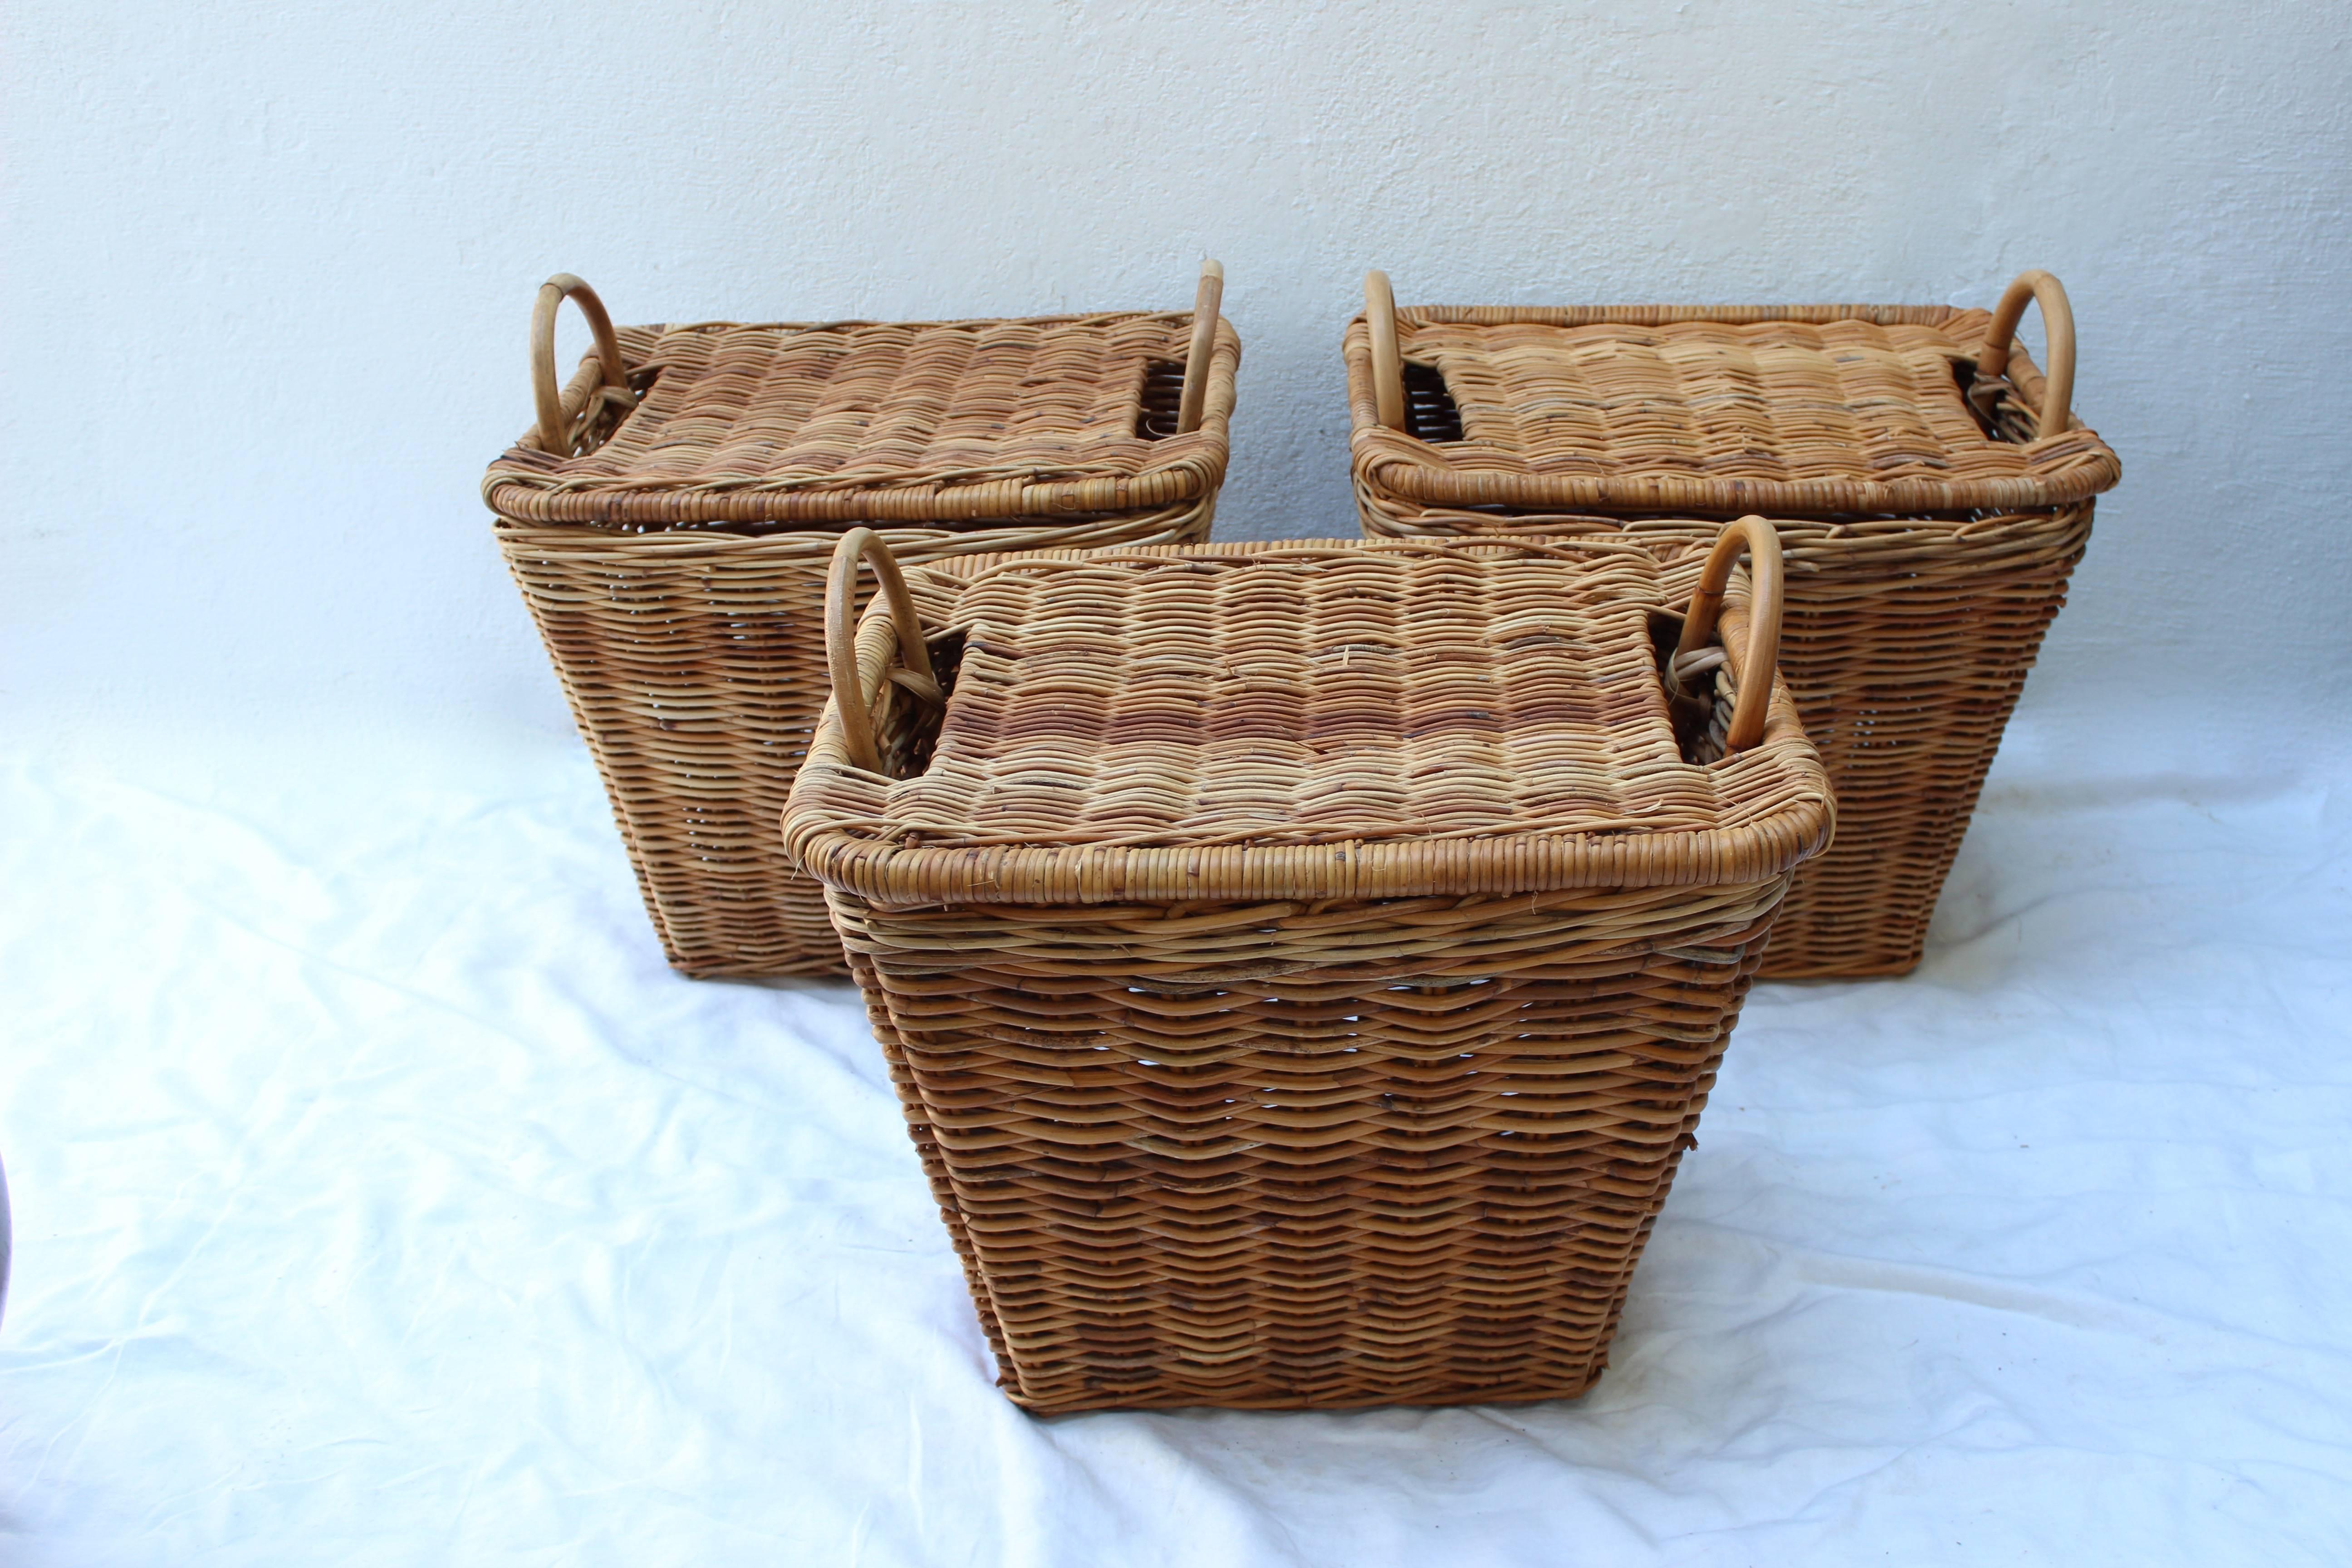 Very attractive set of three baskets with lids inset into the top handles, great fun design.